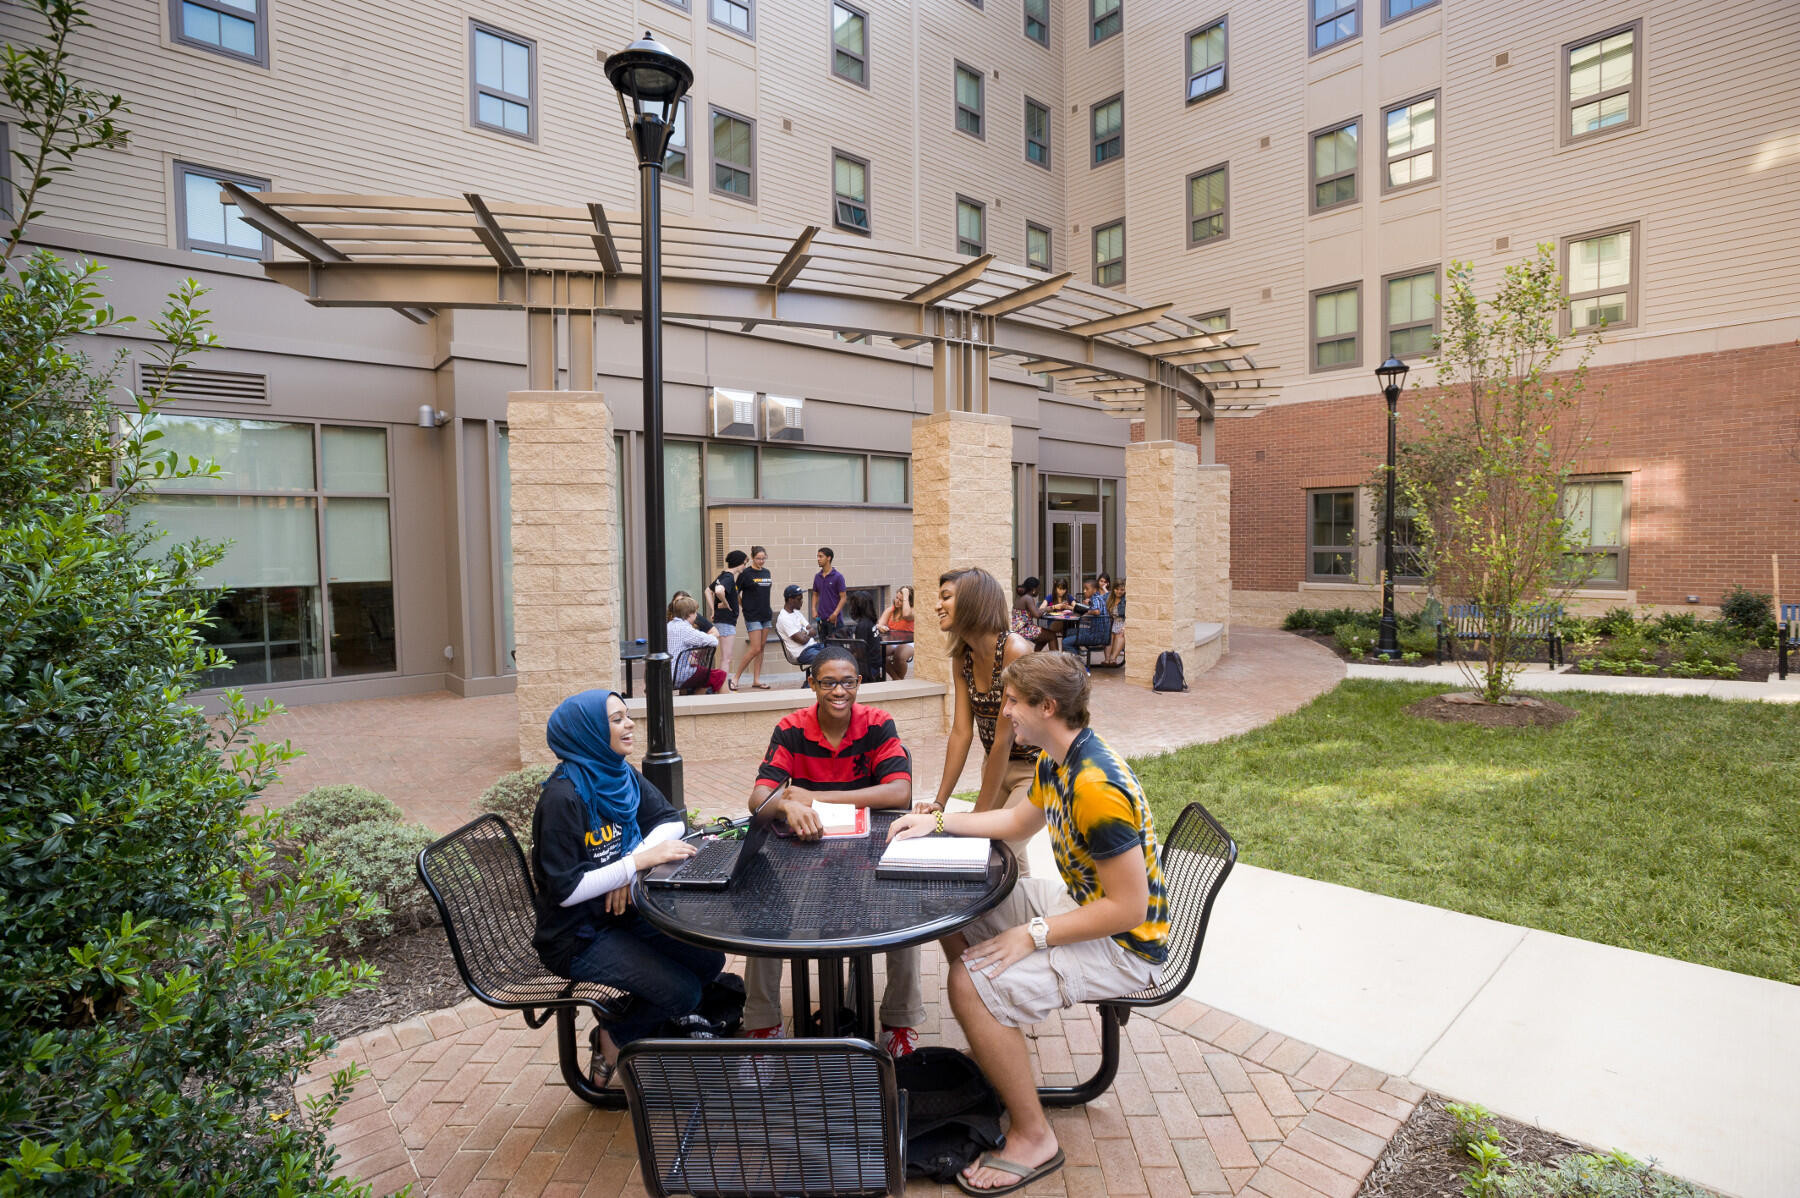 Living-learning communities at VCU are designed to integrate on-campus living with a focused academic experience. (Photo by Tom Kojcsich, University Relations)